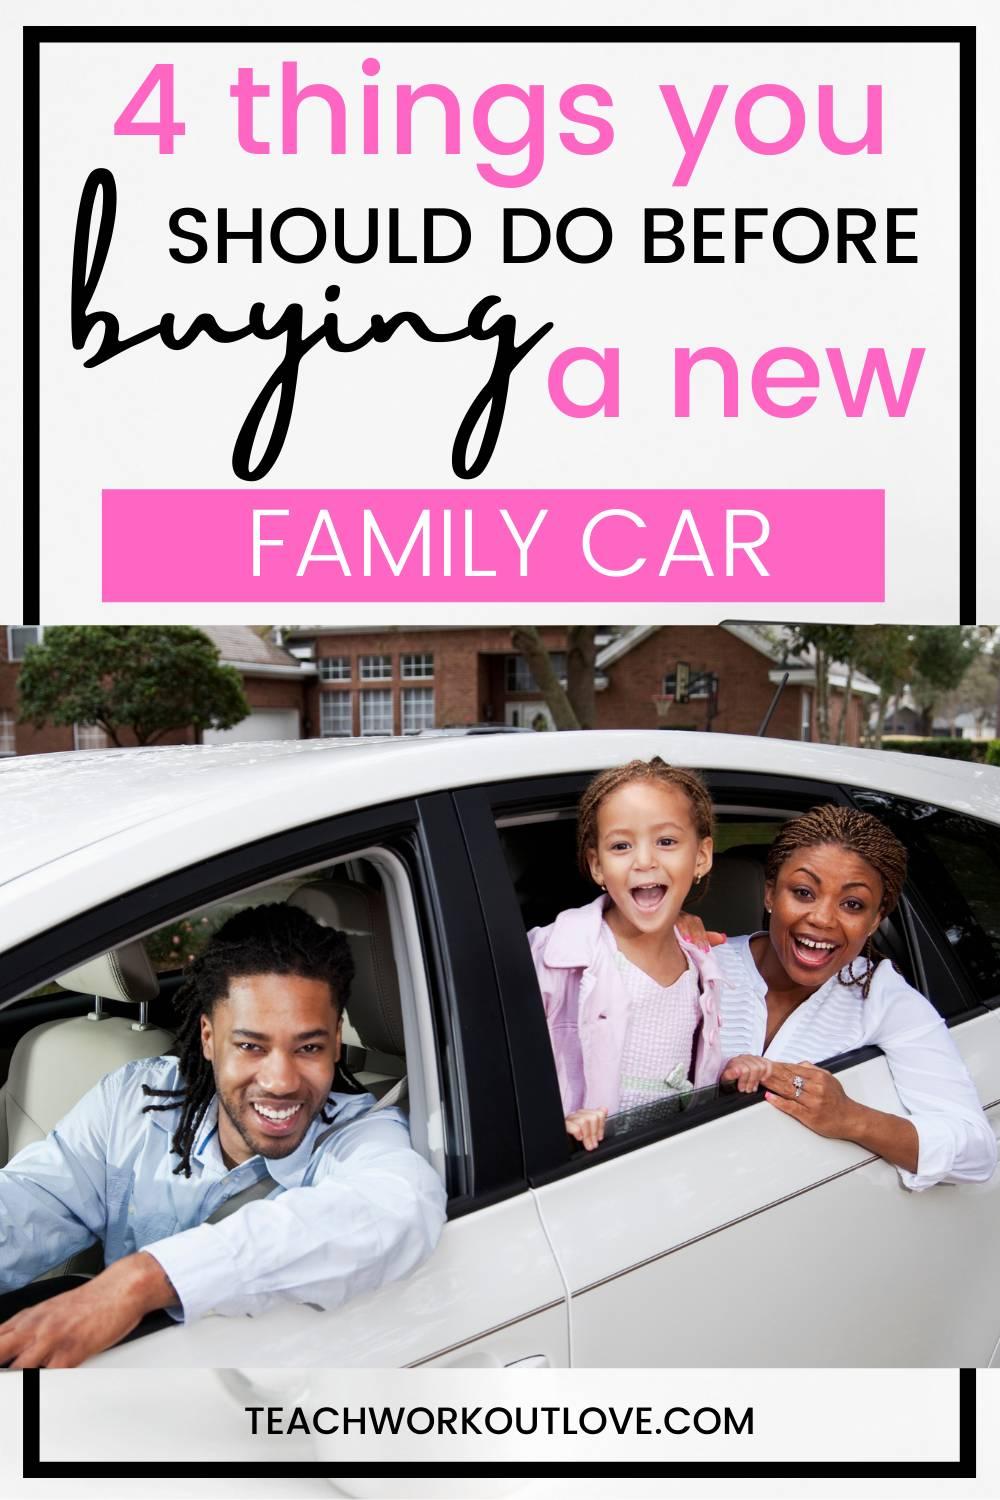 While these are important factors, you also have to think about whether the car meets your various needs as a family, including whether it's safe and reliable.